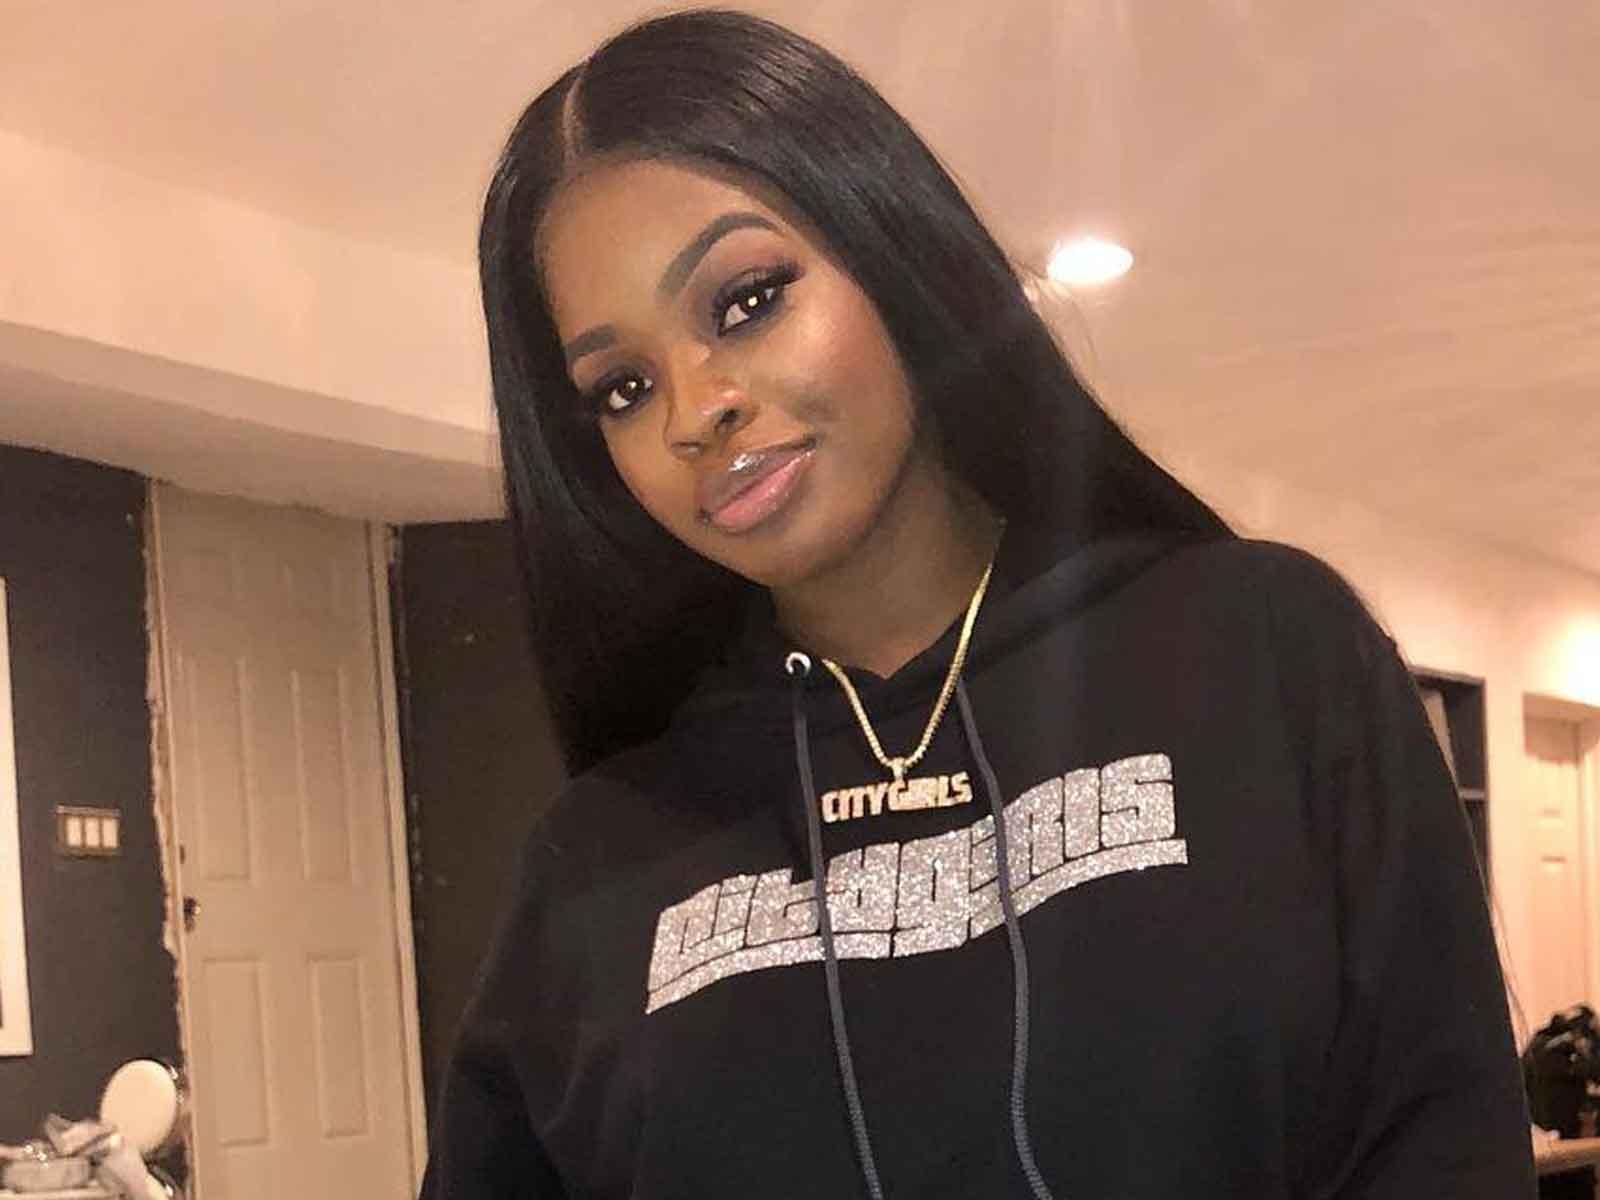 Name-Dropping Drake Helped City Girls Rapper J.T. Delay Prison Check-in